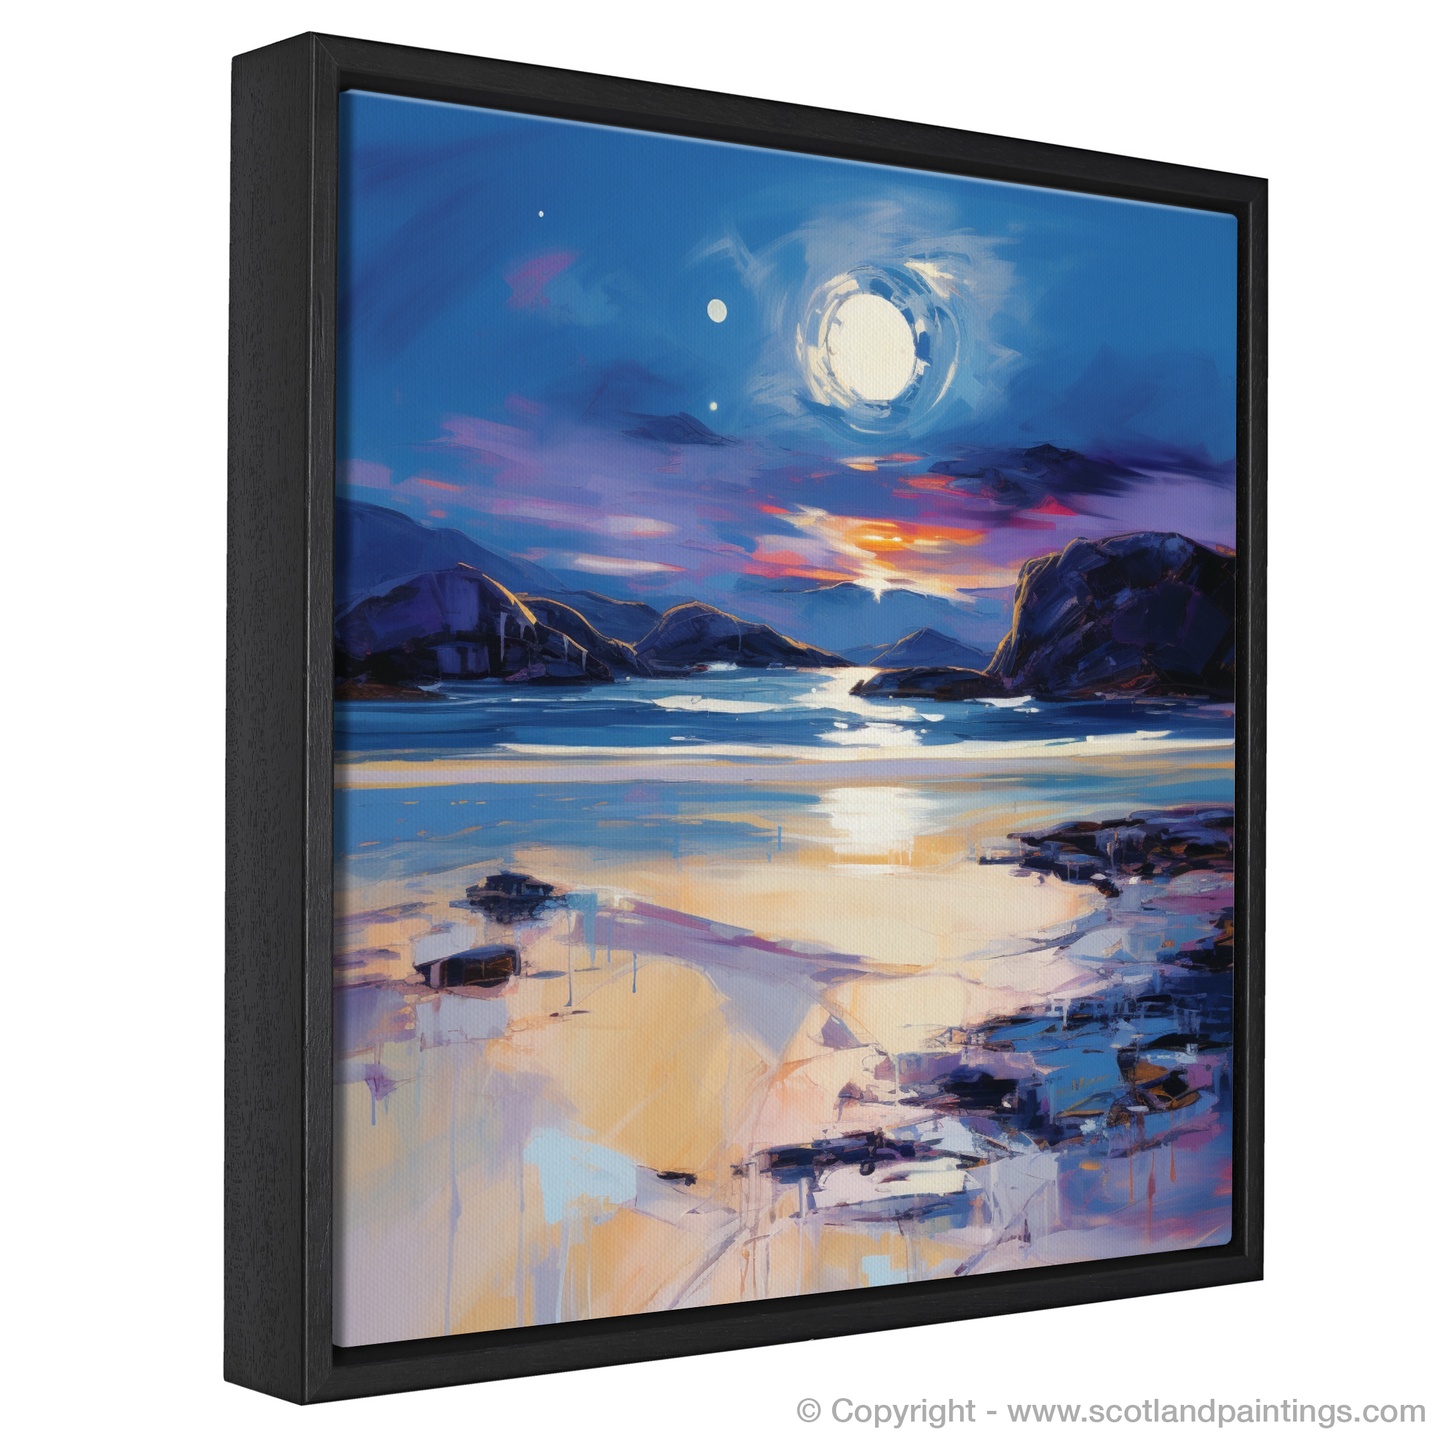 Painting and Art Print of Traigh Mhor at dusk entitled "Dusk's Embrace at Traigh Mhor Cove".